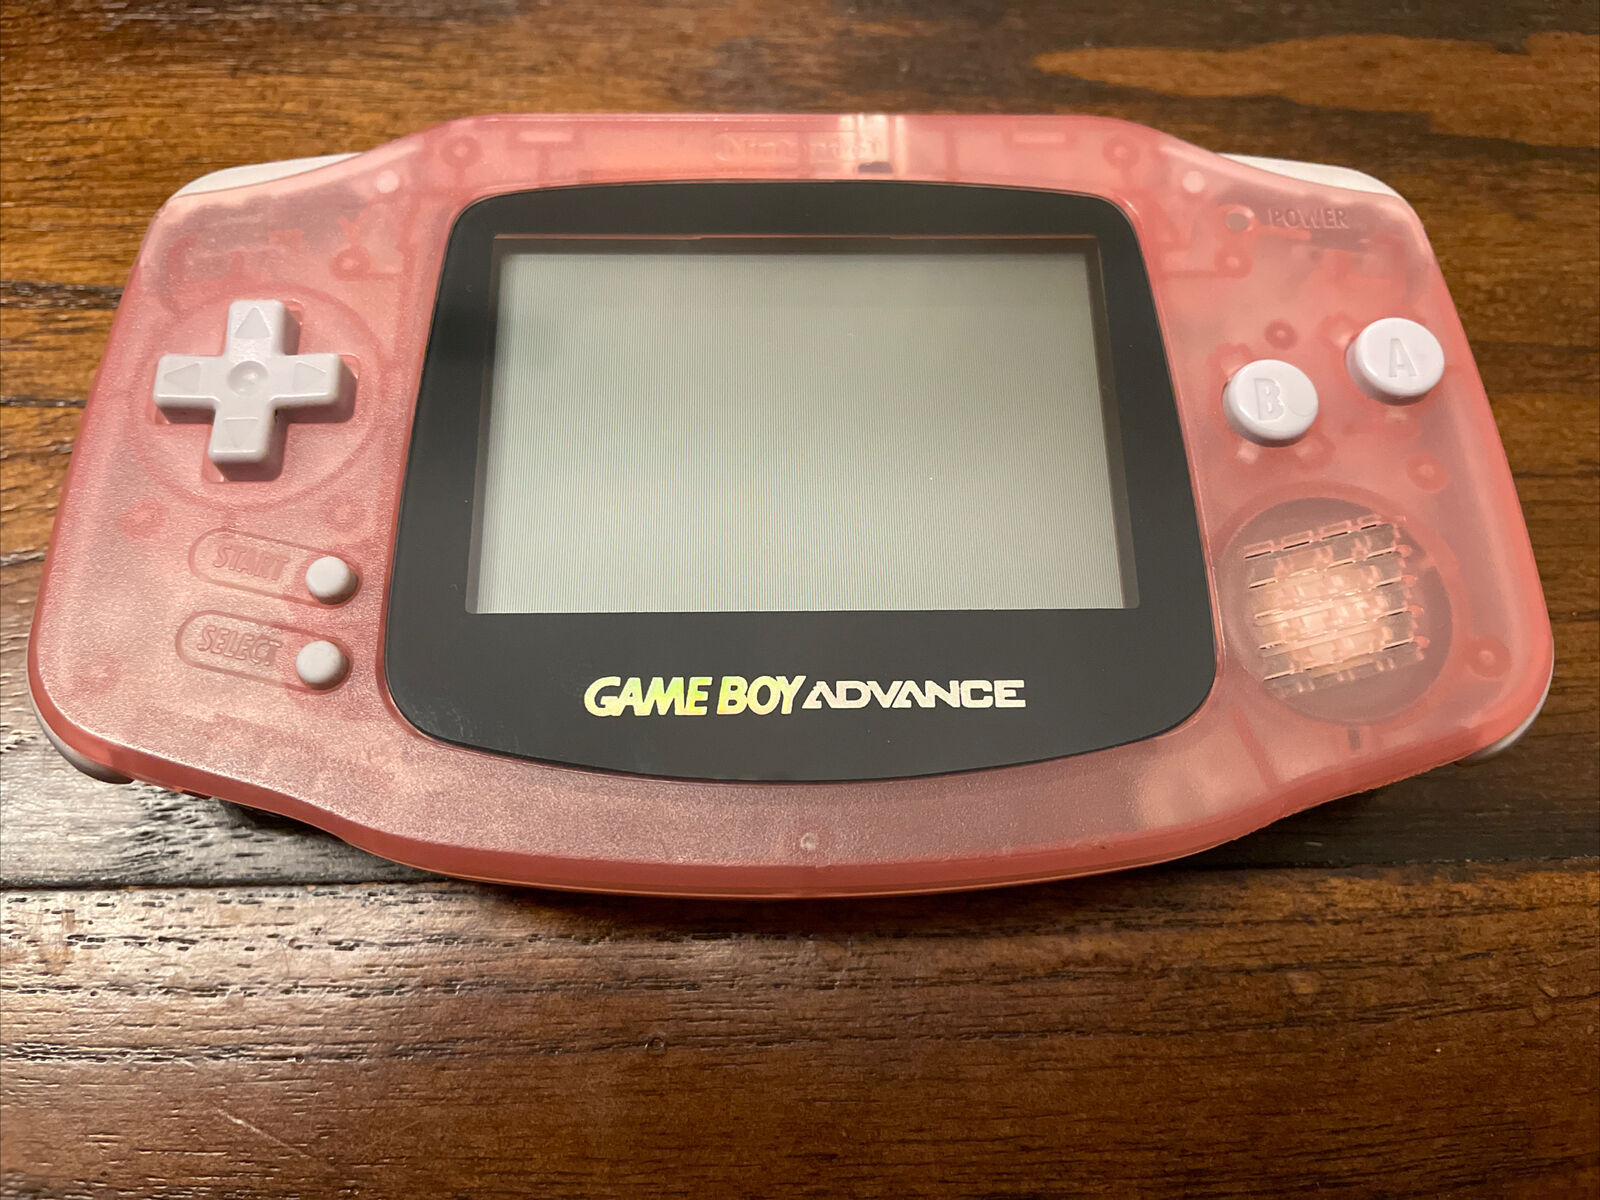 GBA: CONSOLE - GAMEBOY ADVANCE - FUSCHIA / PINK - W/O BATTERY COVER (USED)